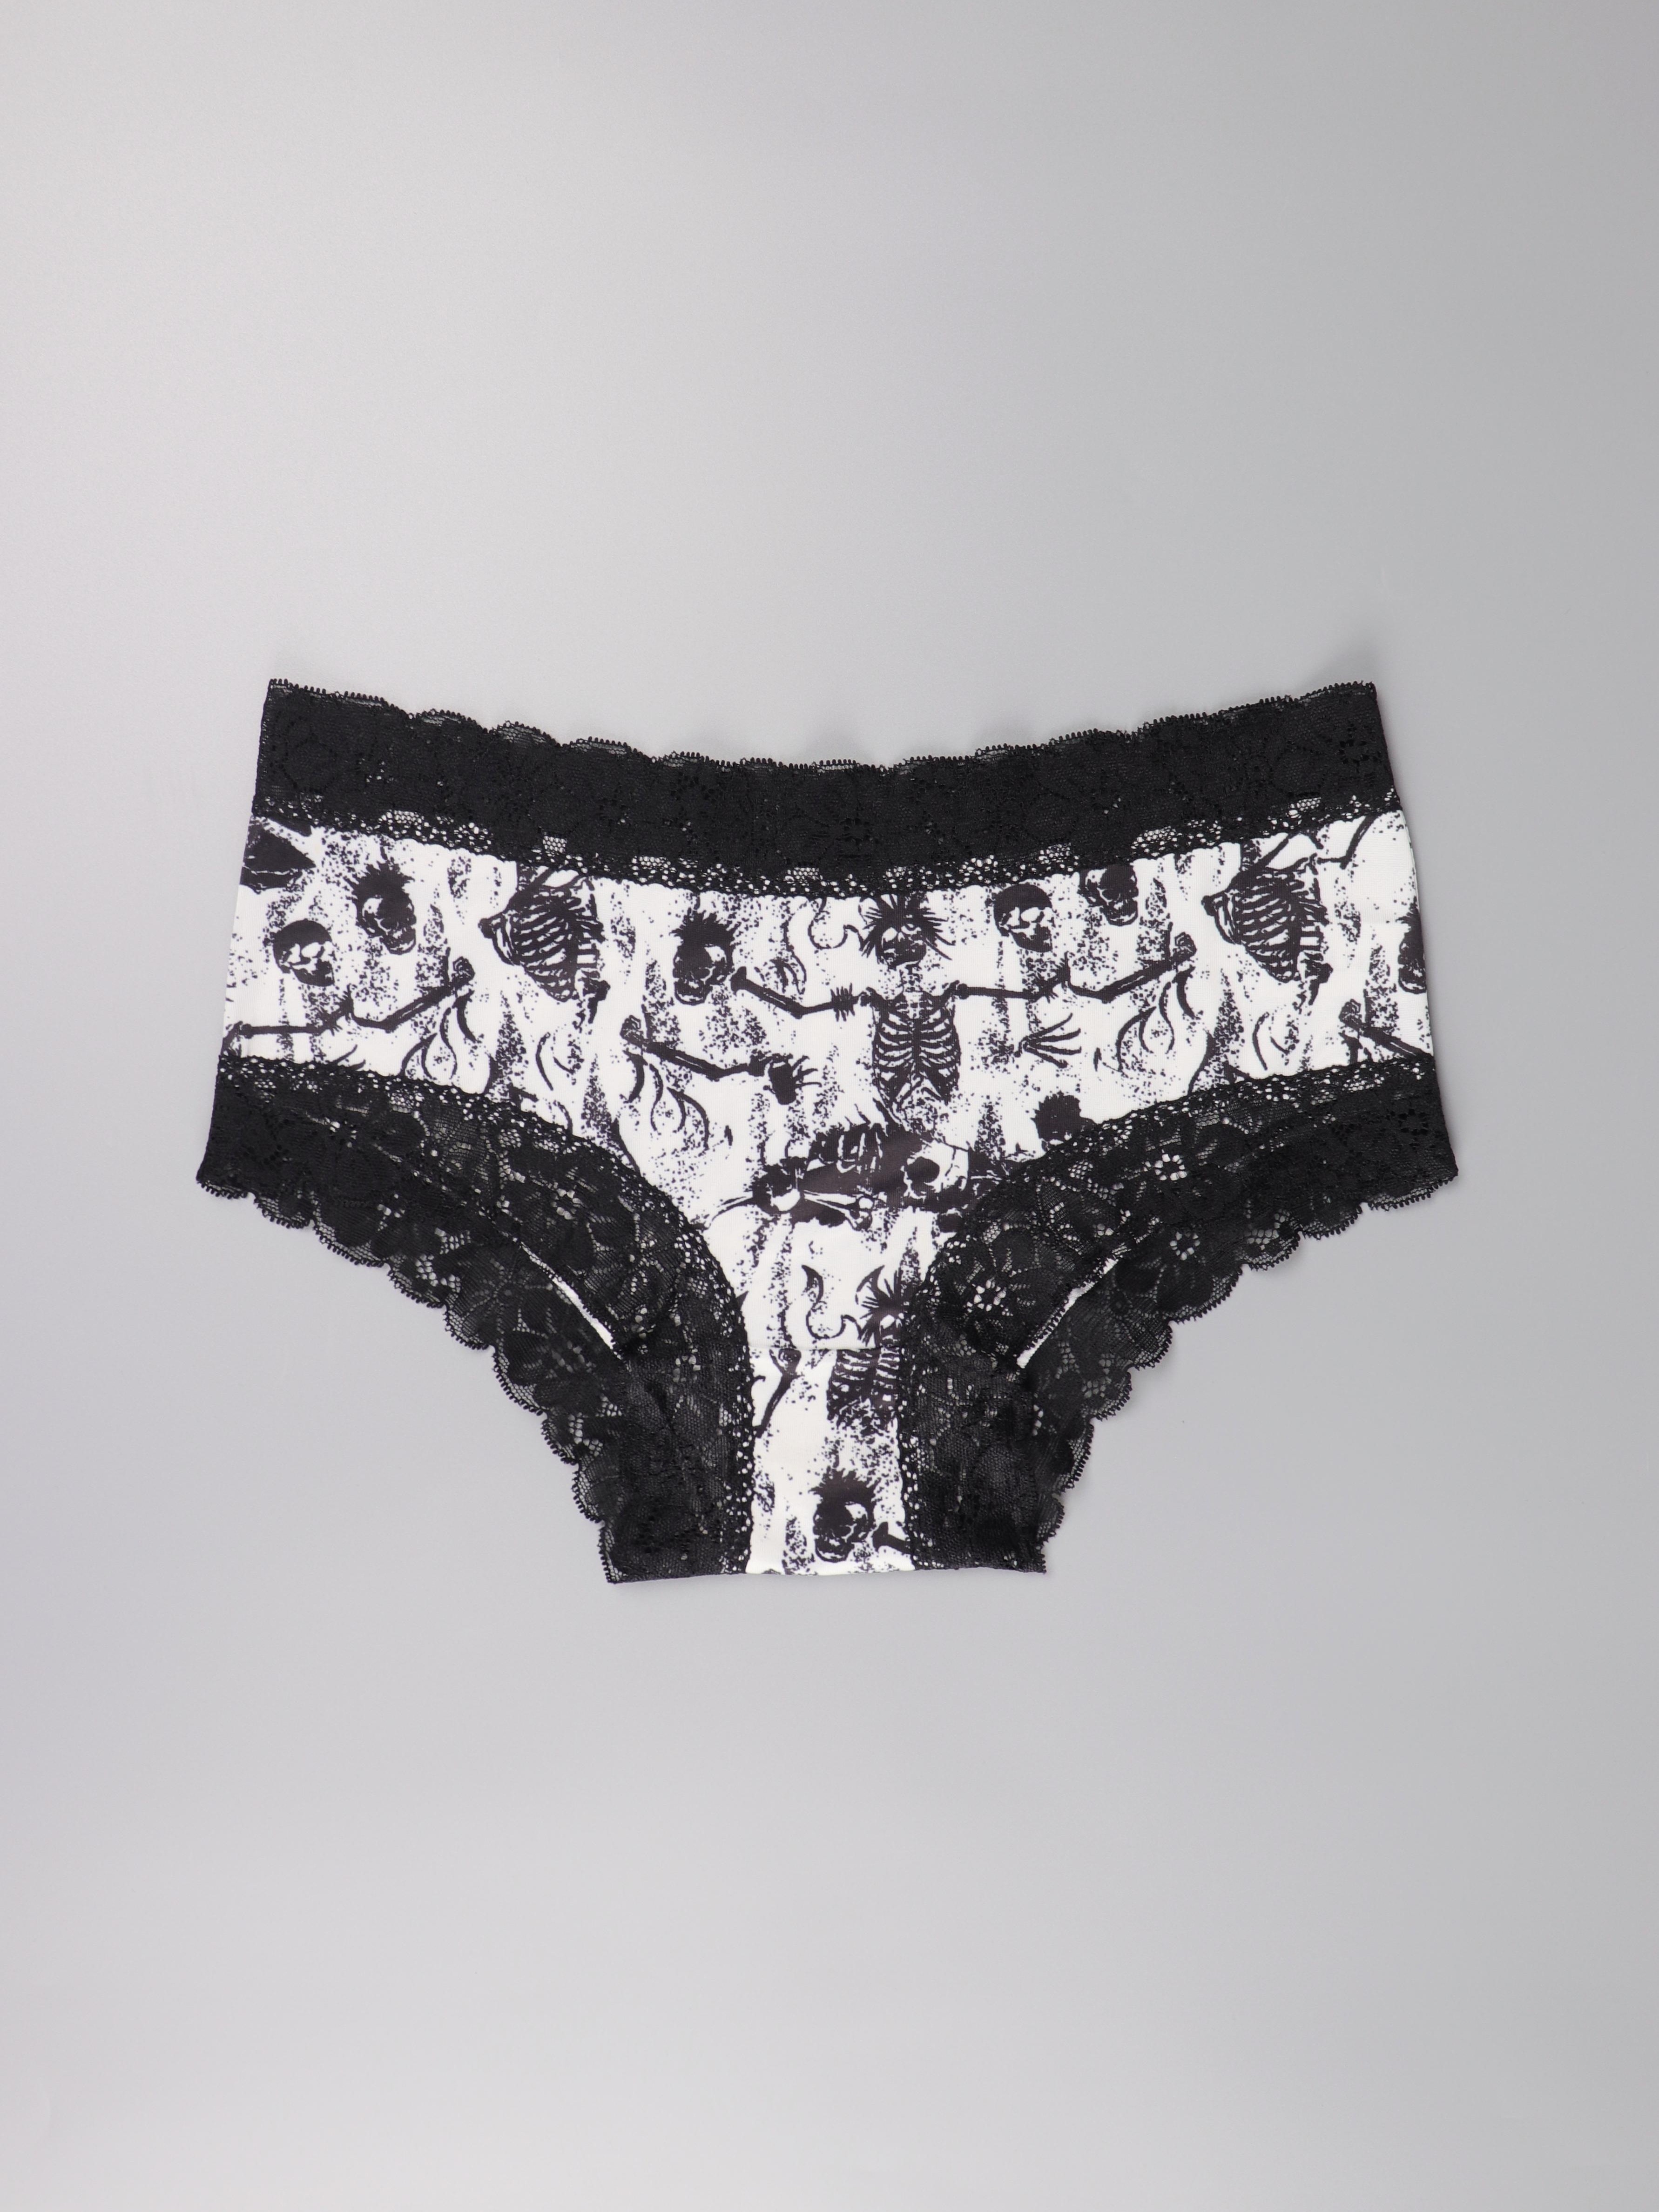 ROMWE Goth 3pack Skull Print Contrast Lace Panty Set